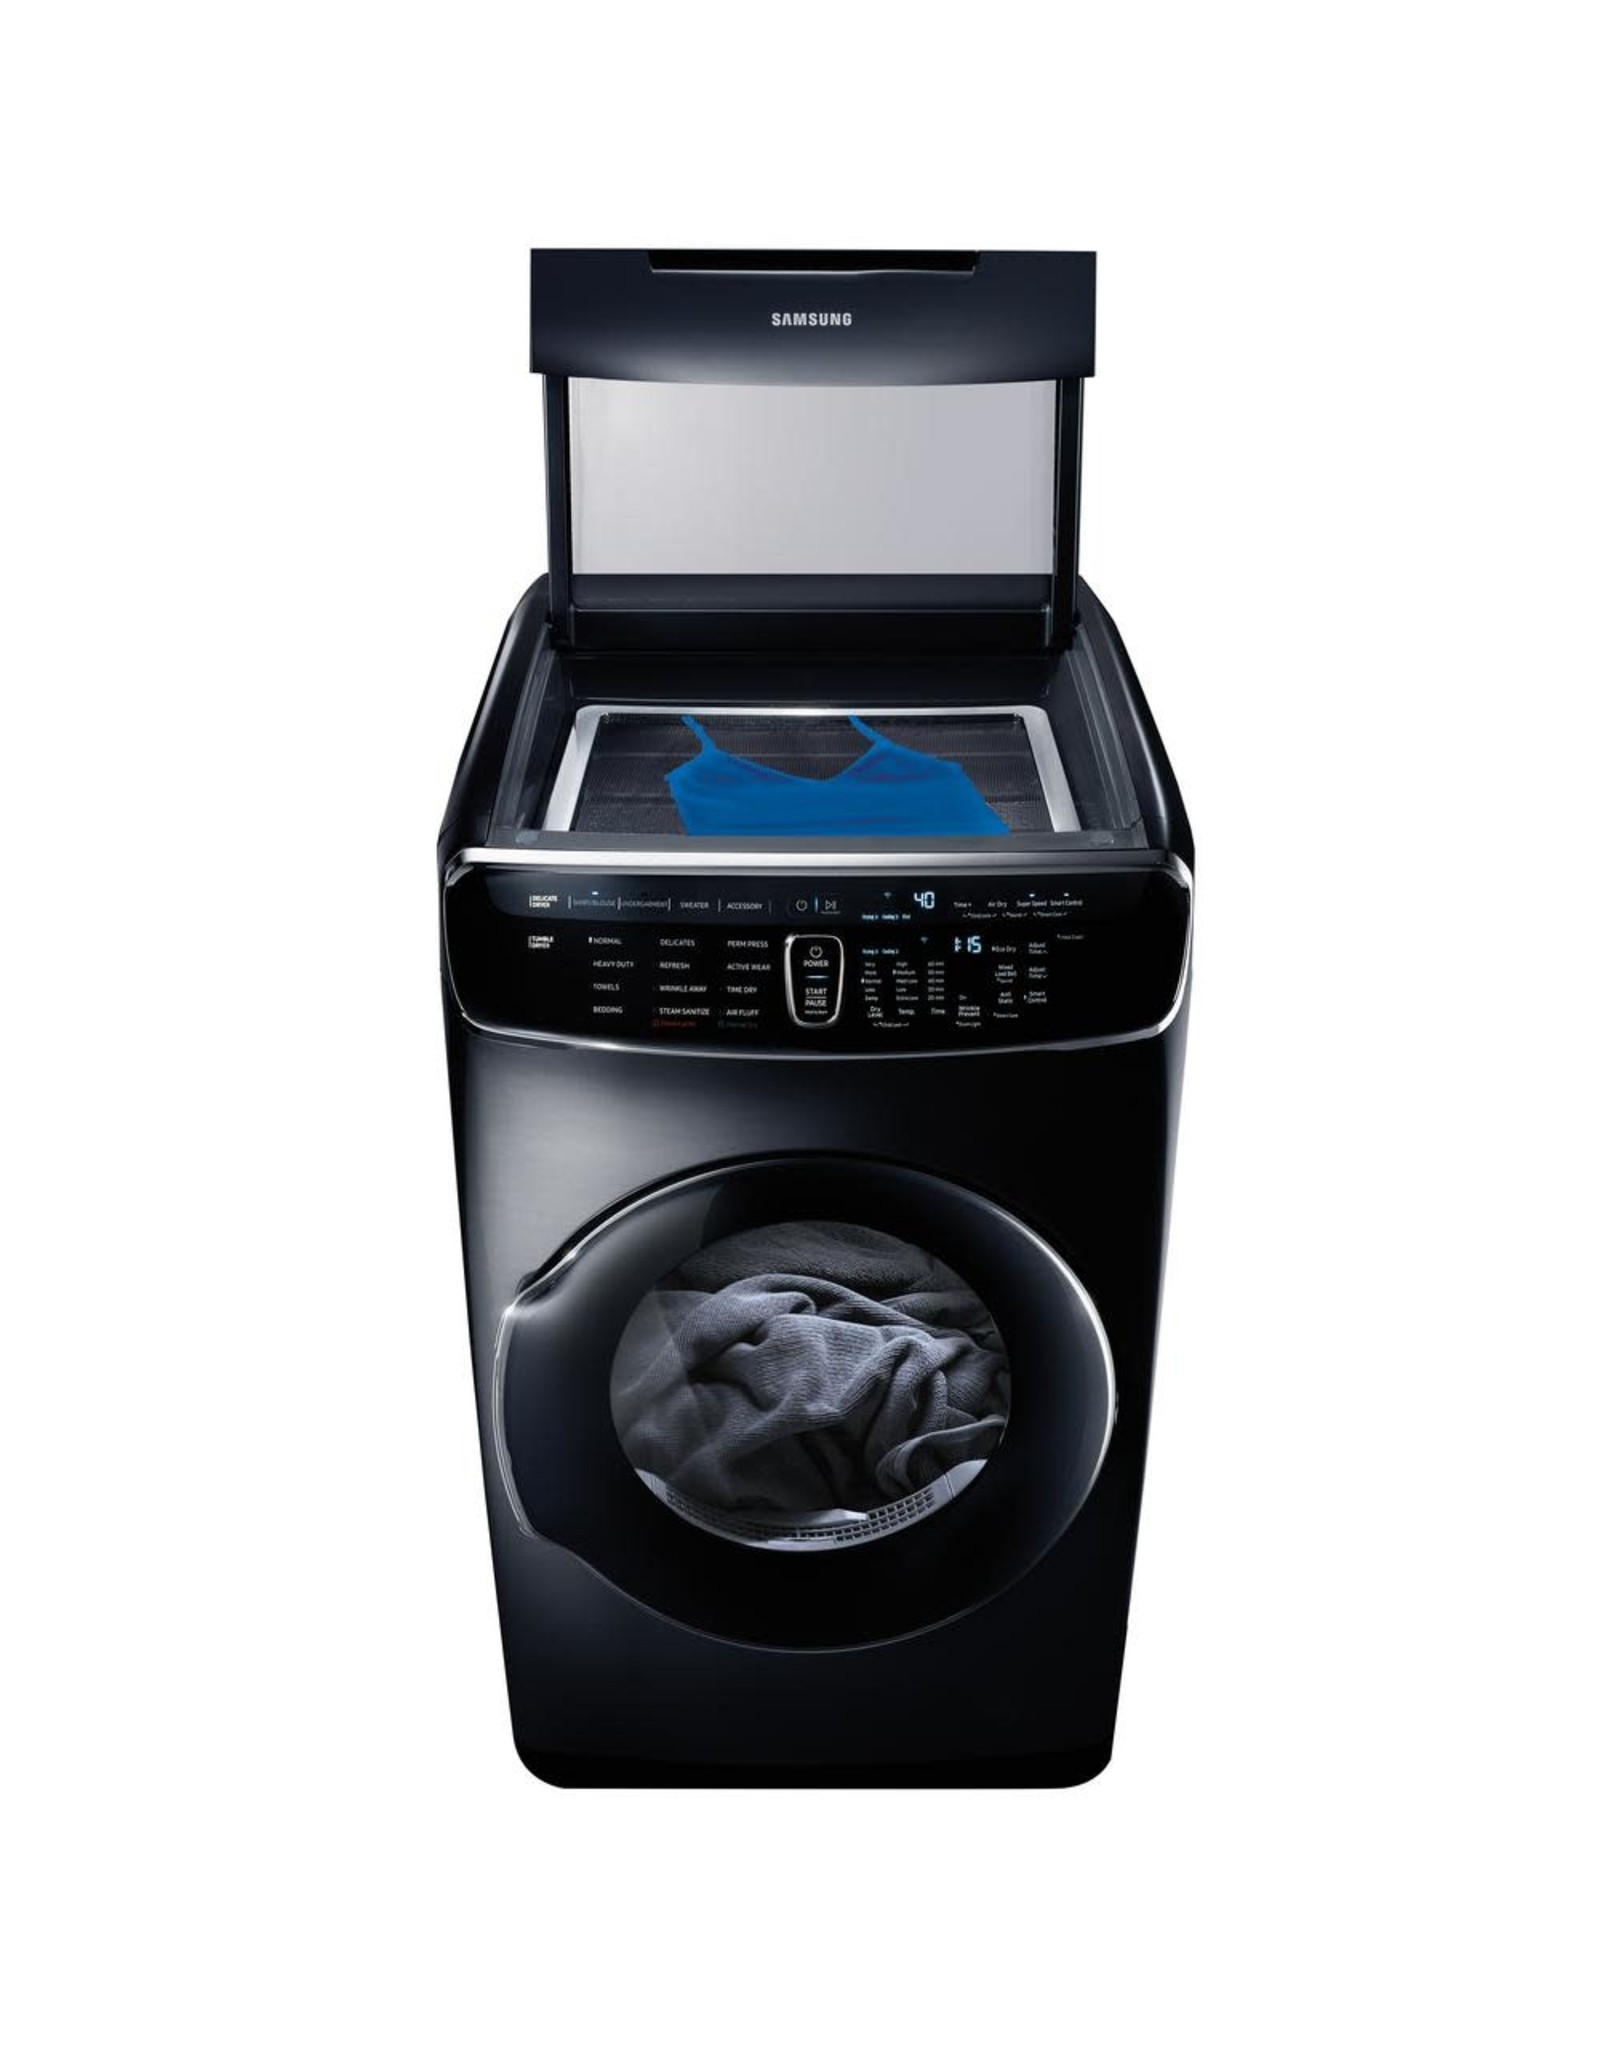 SAMSUNG DVG60M9900V 7.5 Total cu. ft. Gas FlexDry Dryer with Steam in Black Stainless